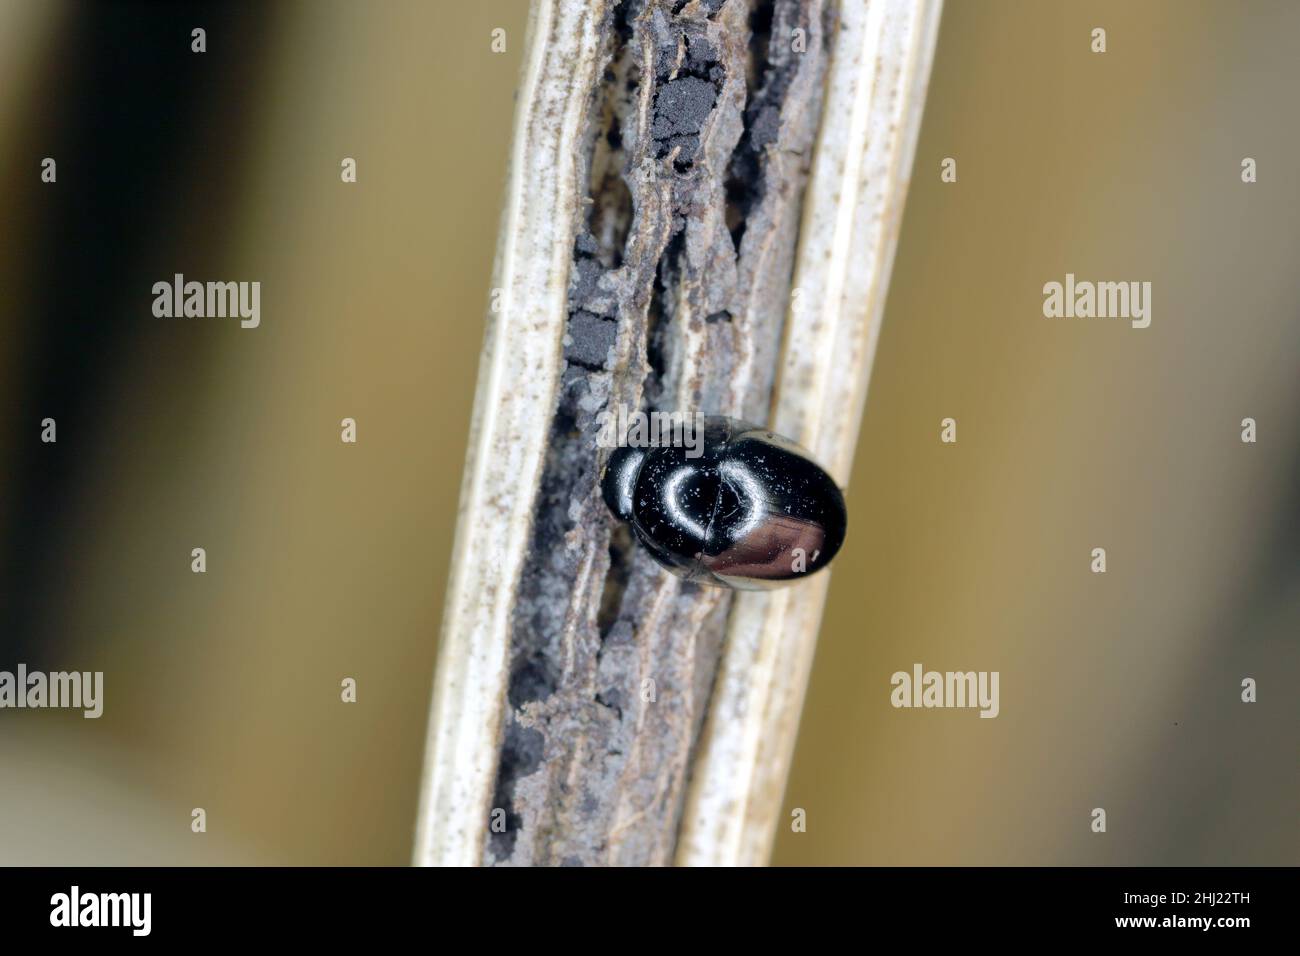 Beetle Phalacrus corruscus feeding on mycelium of stripe smut of rye it is disease caused by the fungus Urocystis occulta which attacks the leaves. Stock Photo